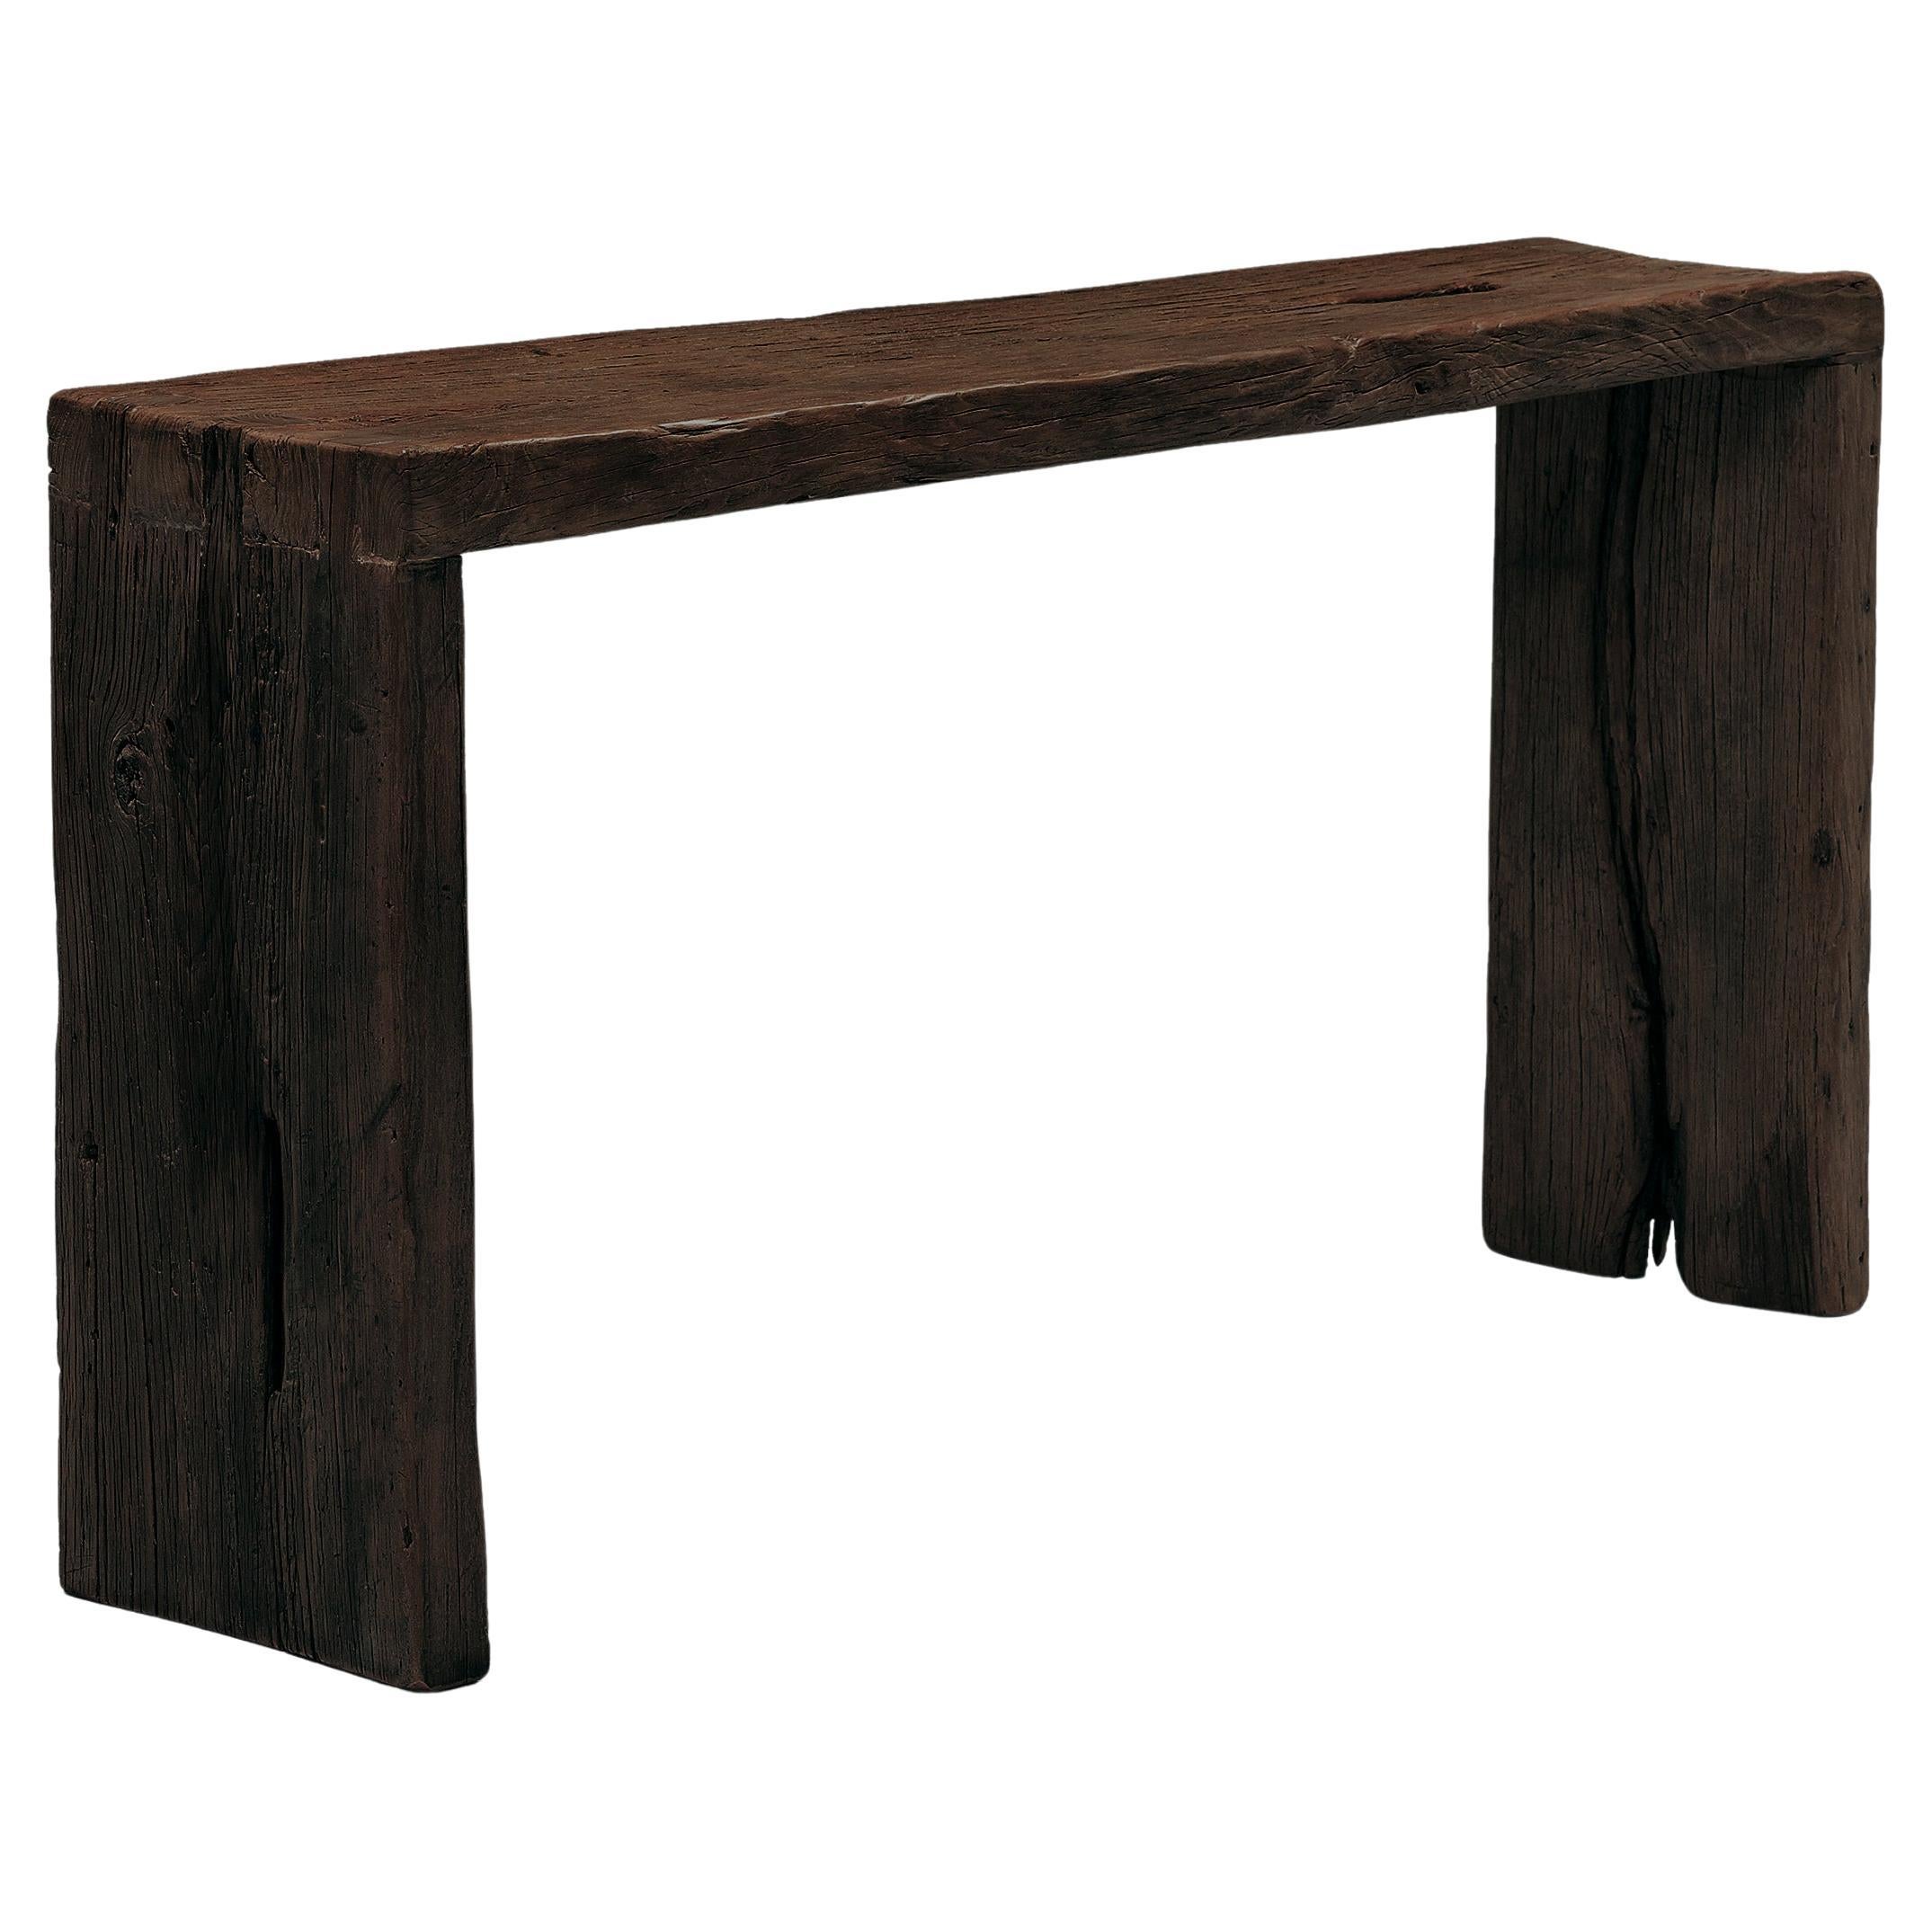 Custom Espresso Reclaimed Waterfall Table For Sale